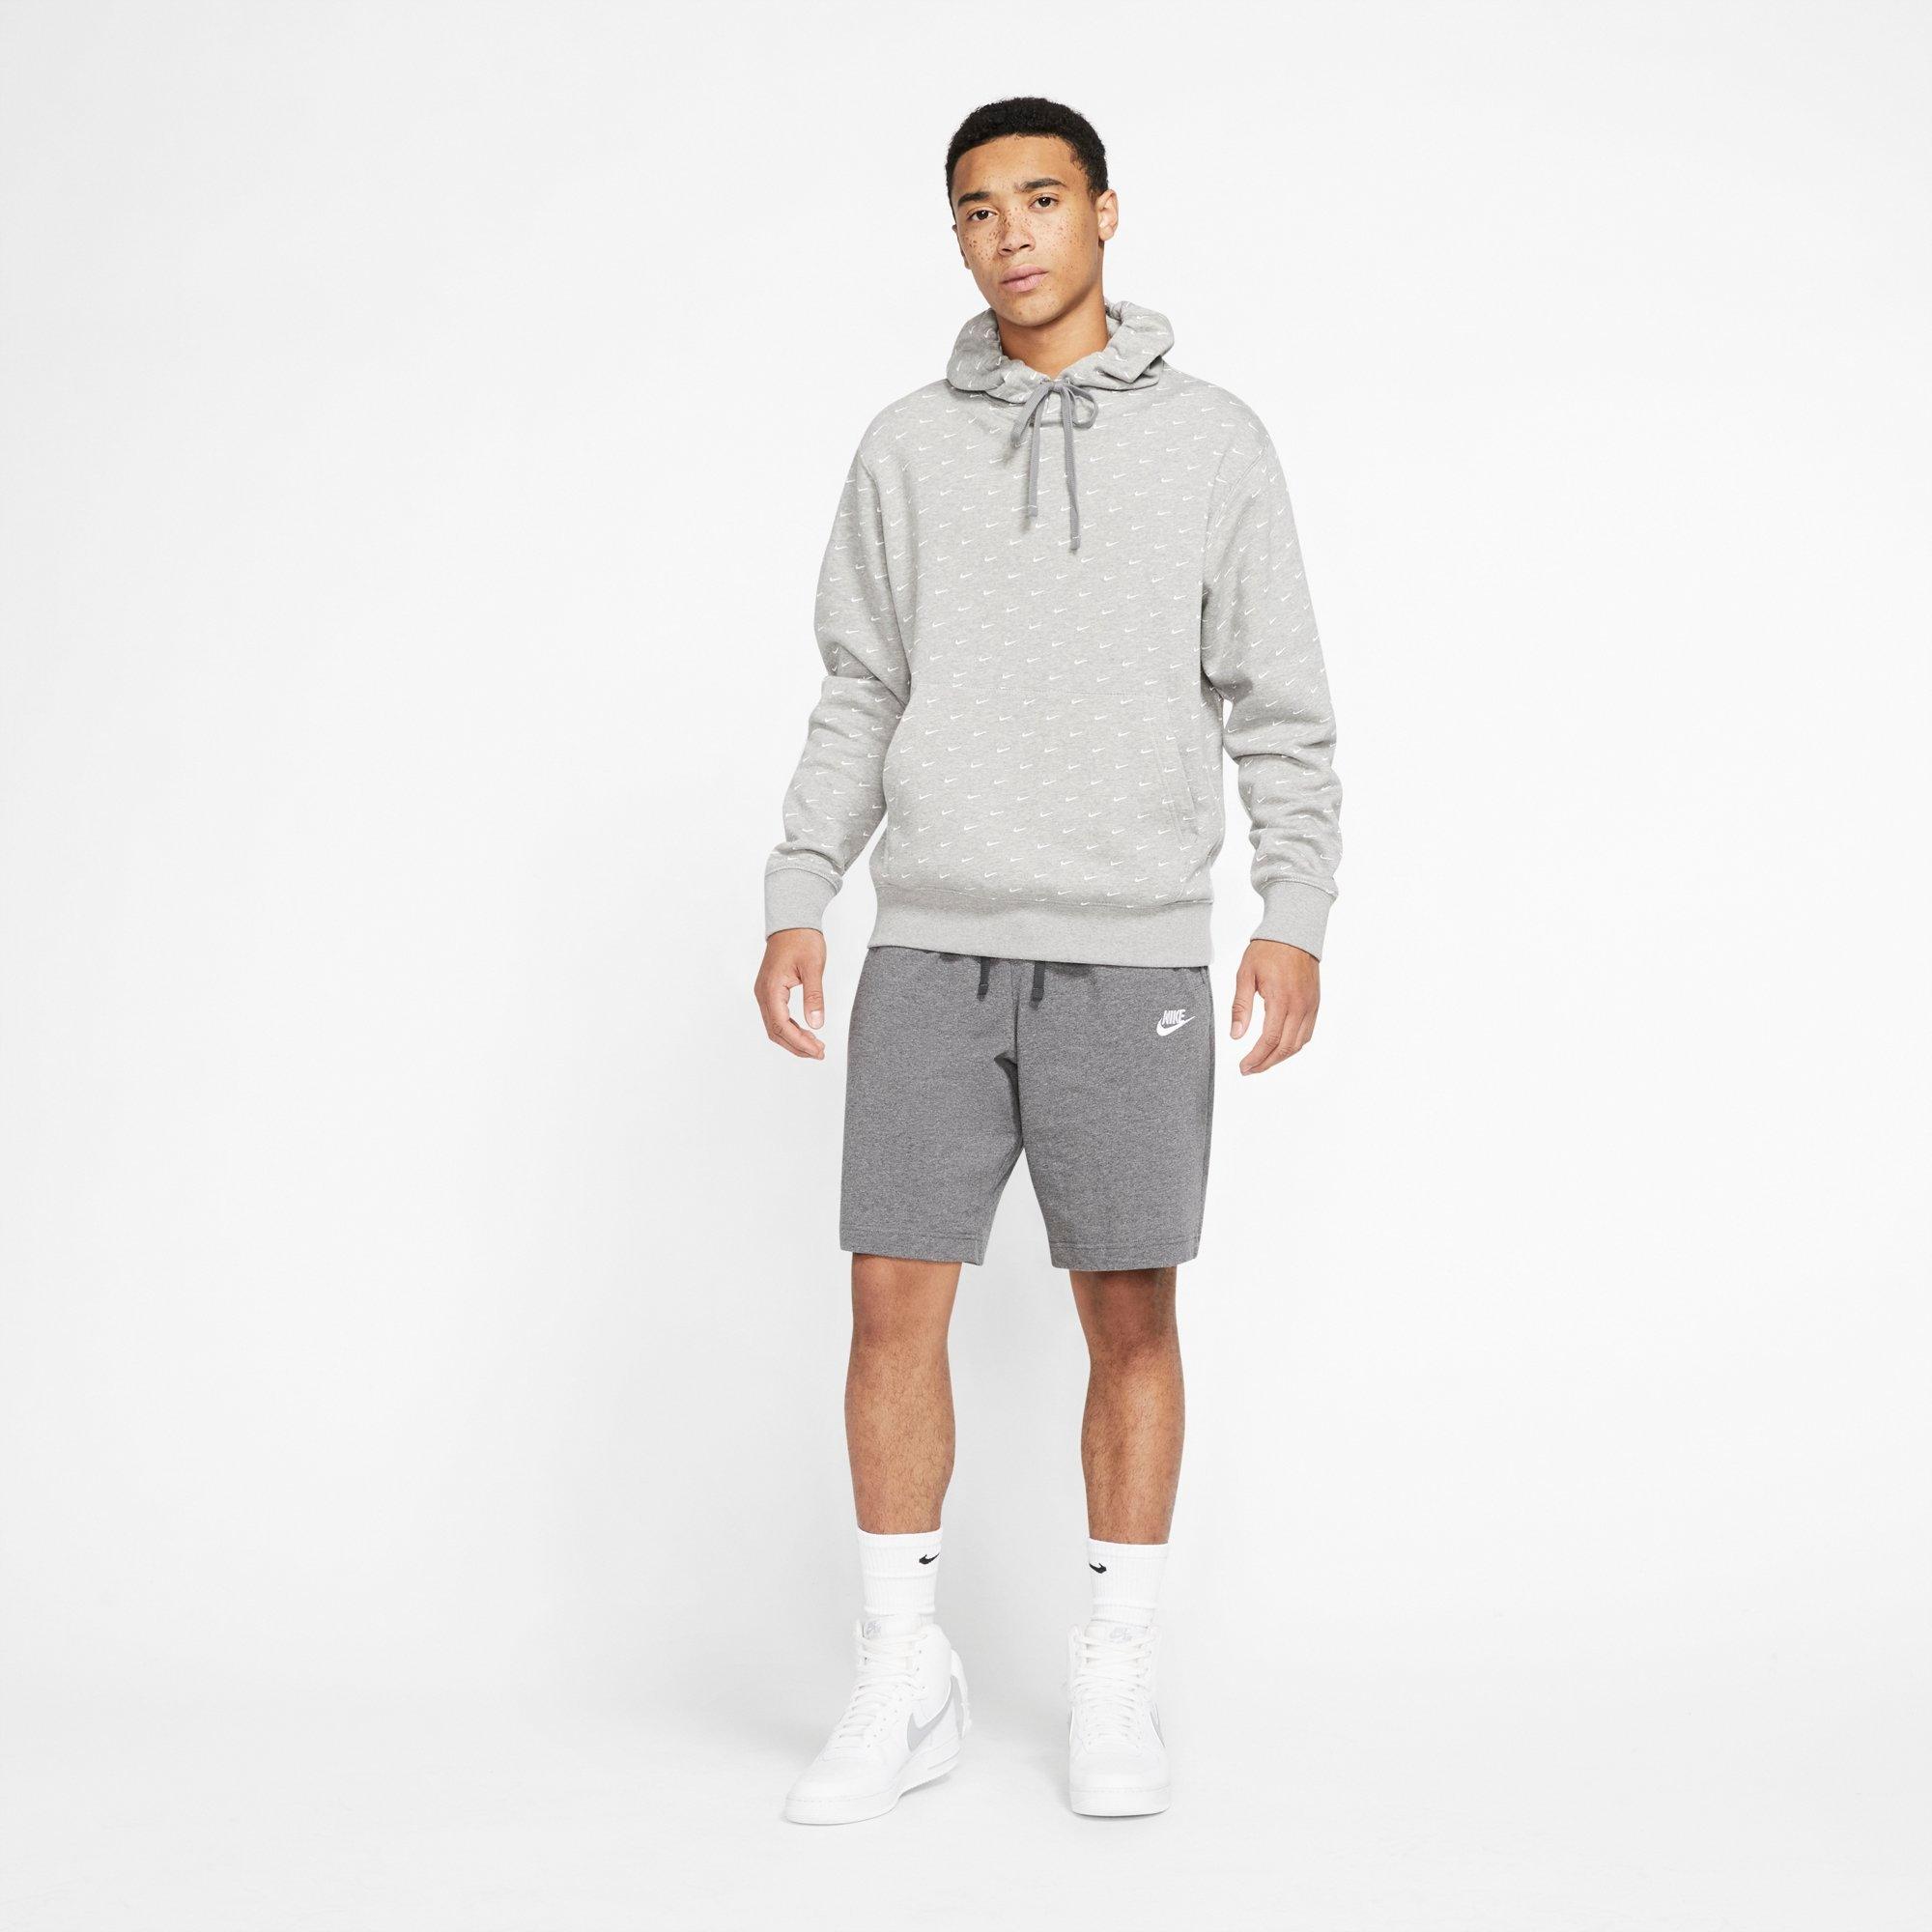 nike sweat shorts outfit